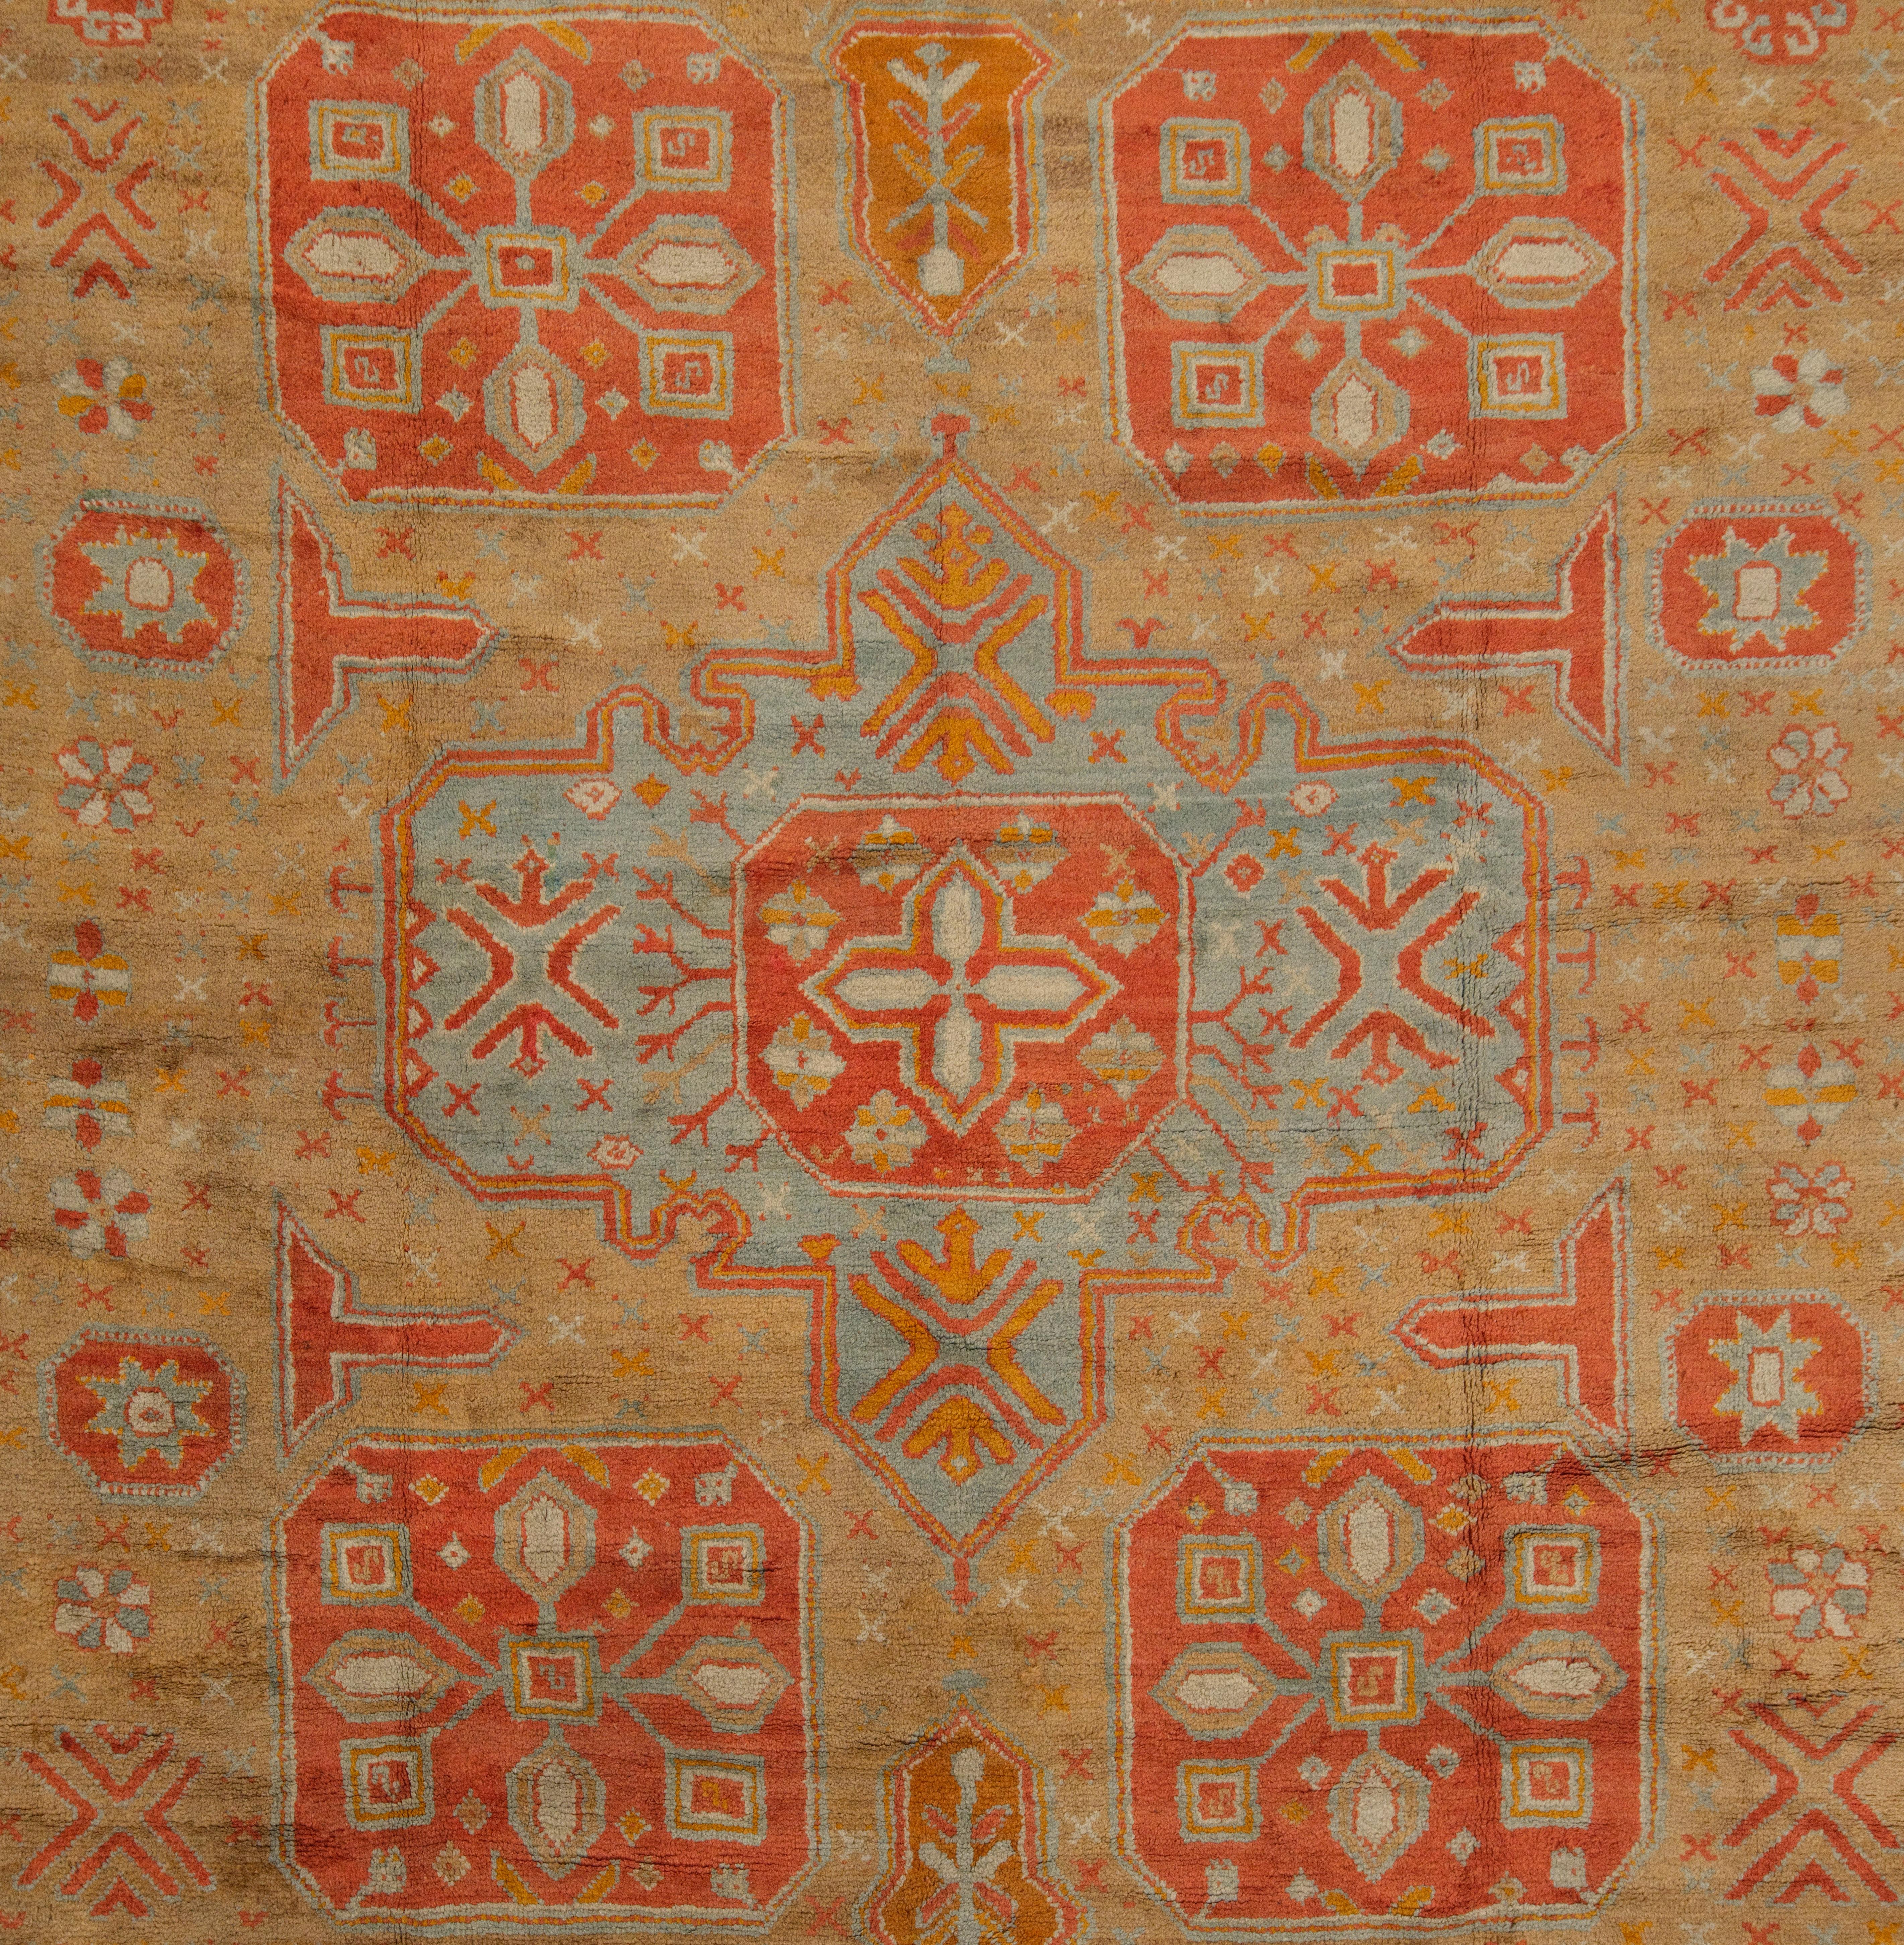 Late 19th century West Anatolia Ushak rug.
A large camel - ground Ushak workshop carpet produced for export. Popular in Europa and the USA, circa 1800, carpets of this kind are usually of coarse weave. They're simply drawn designs – here including a